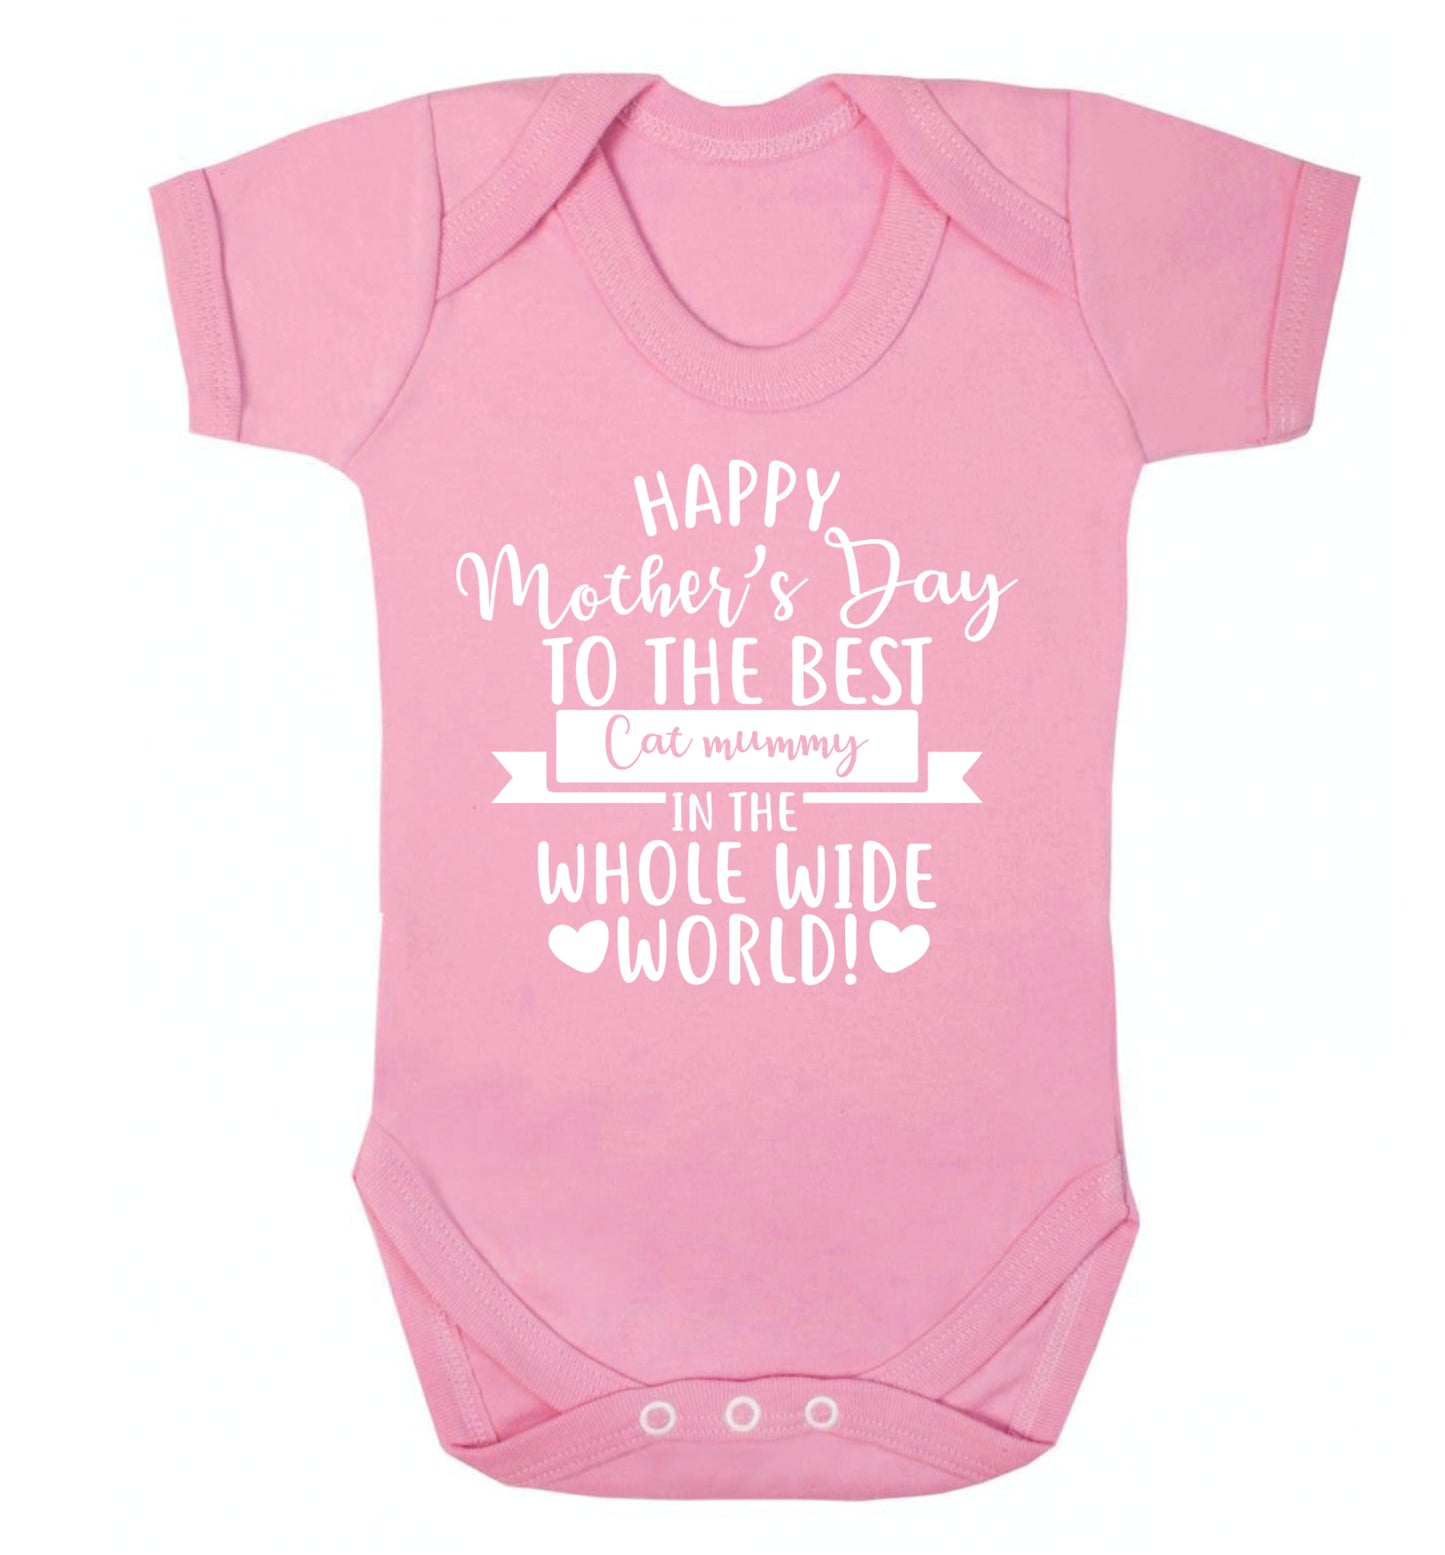 Happy mother's day to the best cat mummy in the world Baby Vest pale pink 18-24 months